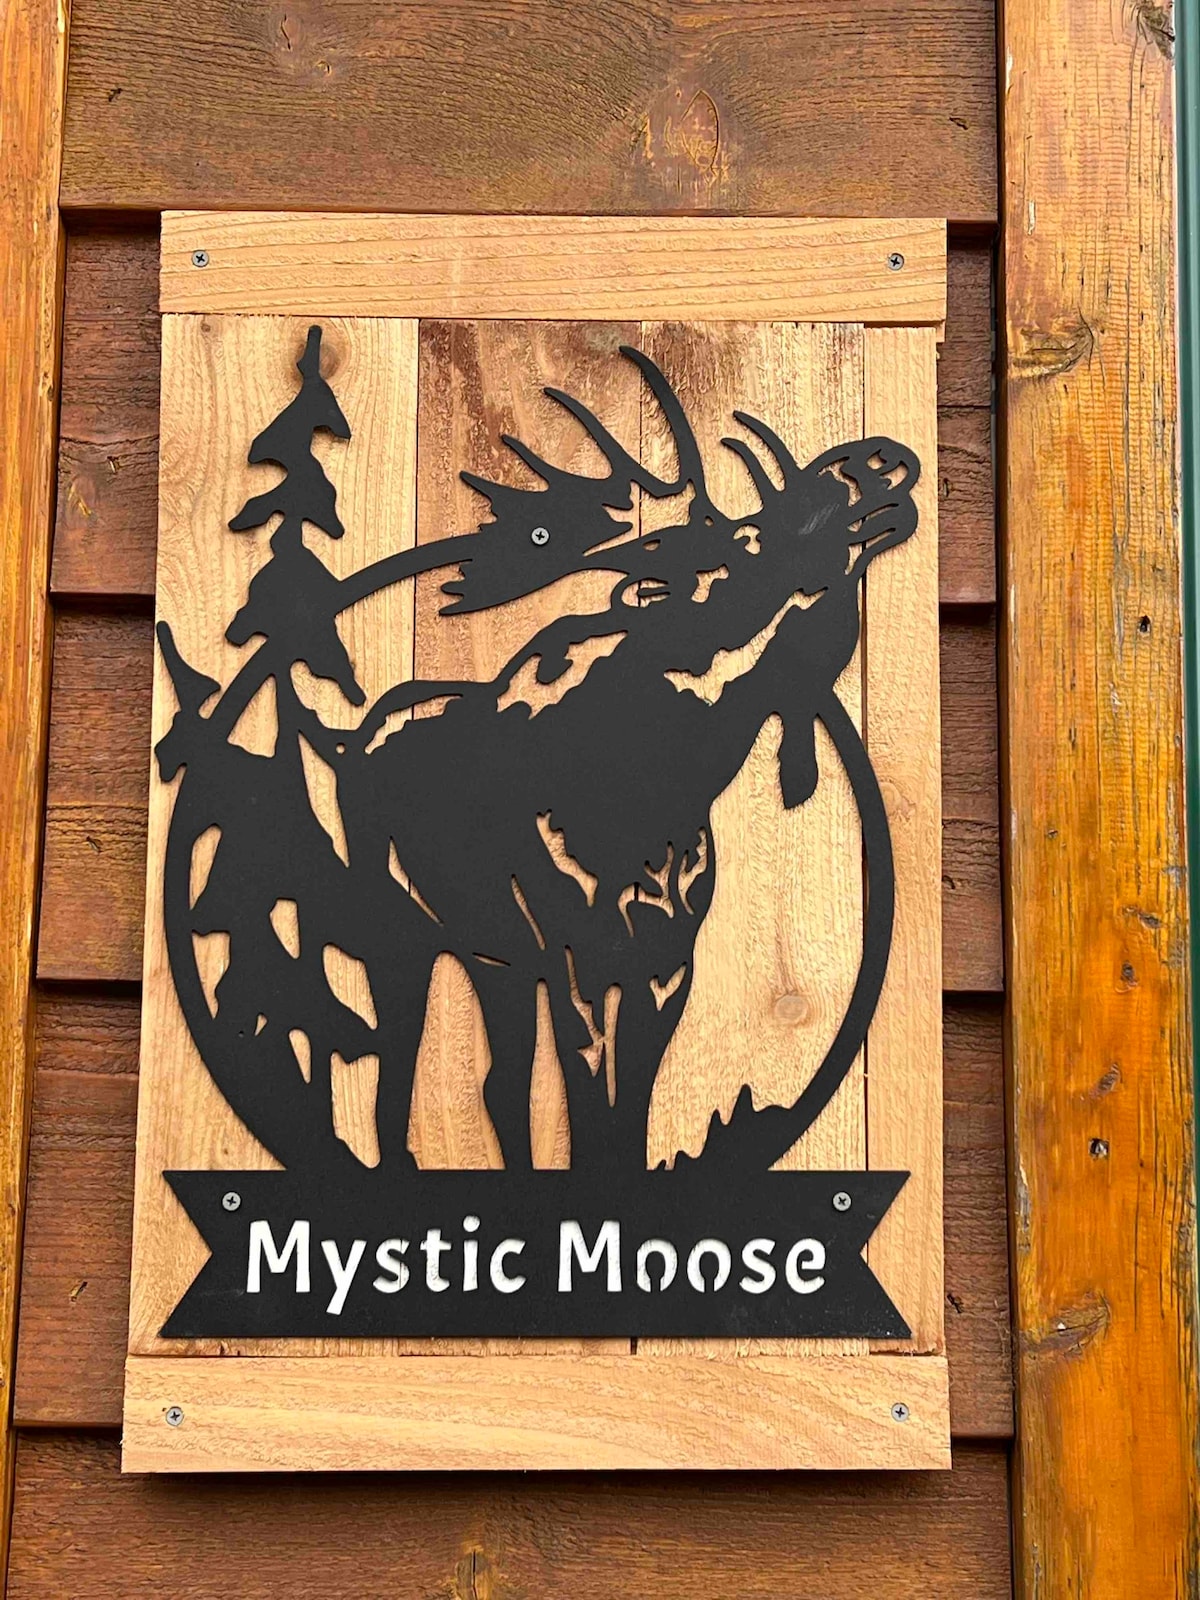 The “Mystic Moose” Home